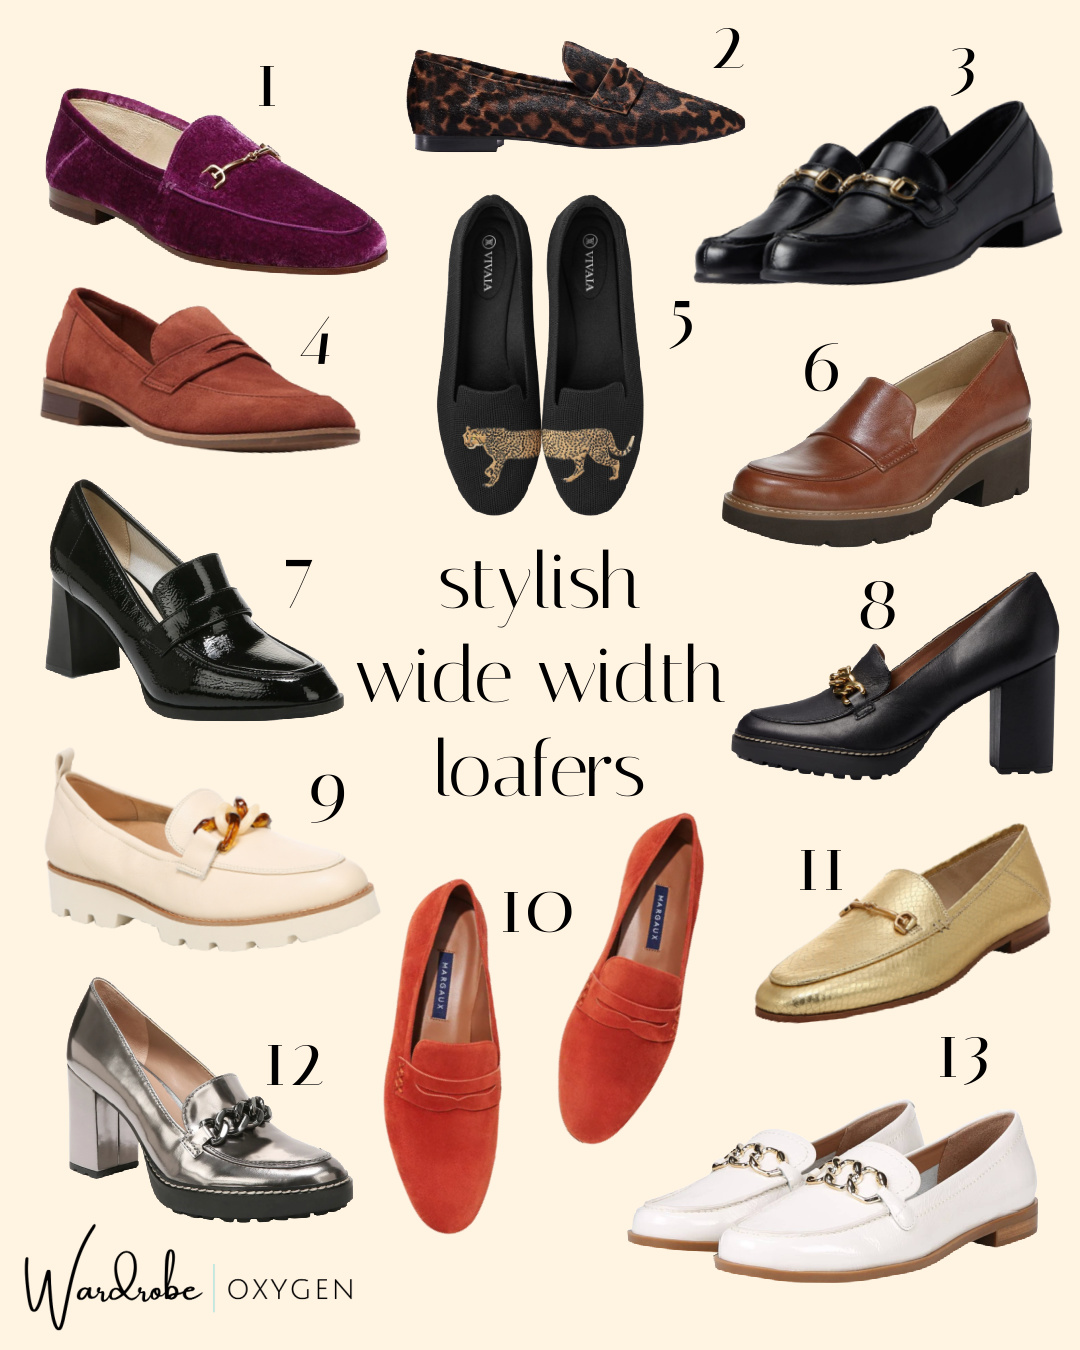 Stylish Wide Width Shoes for Fall: 70+ Great Shoes - Wardrobe Oxygen